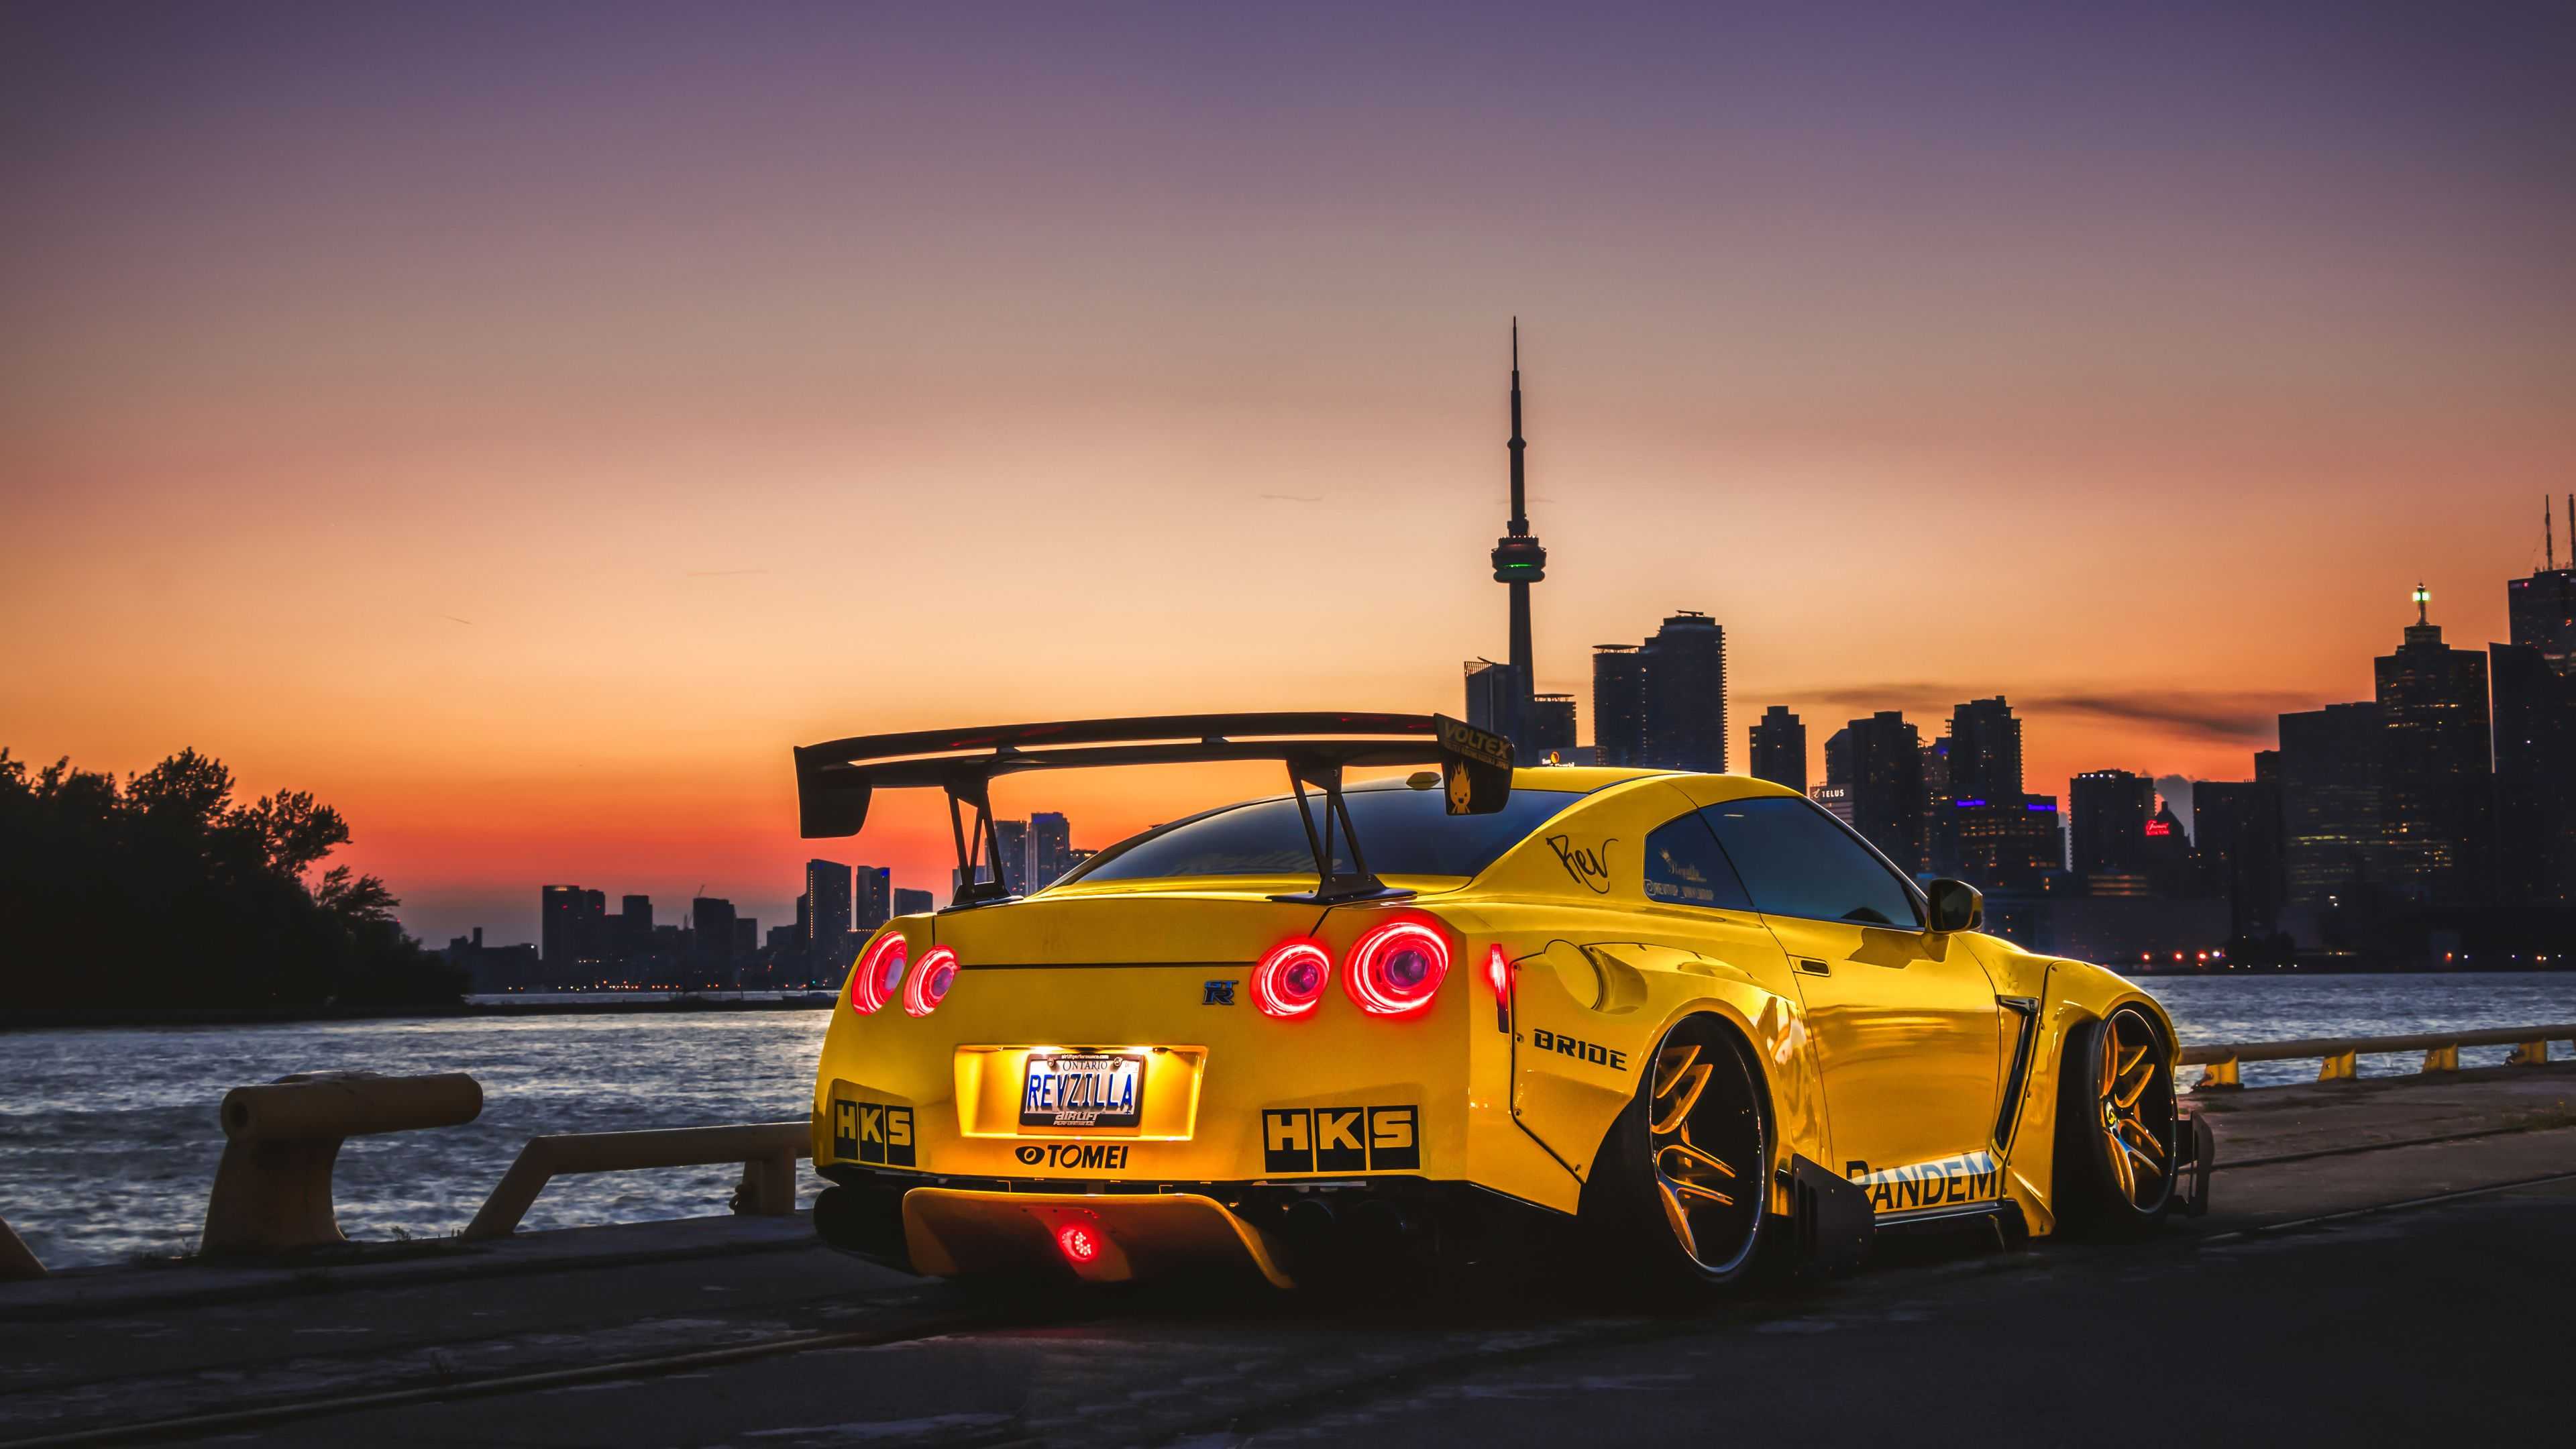 A yellow car parked on the side of the road - Nissan Skyline